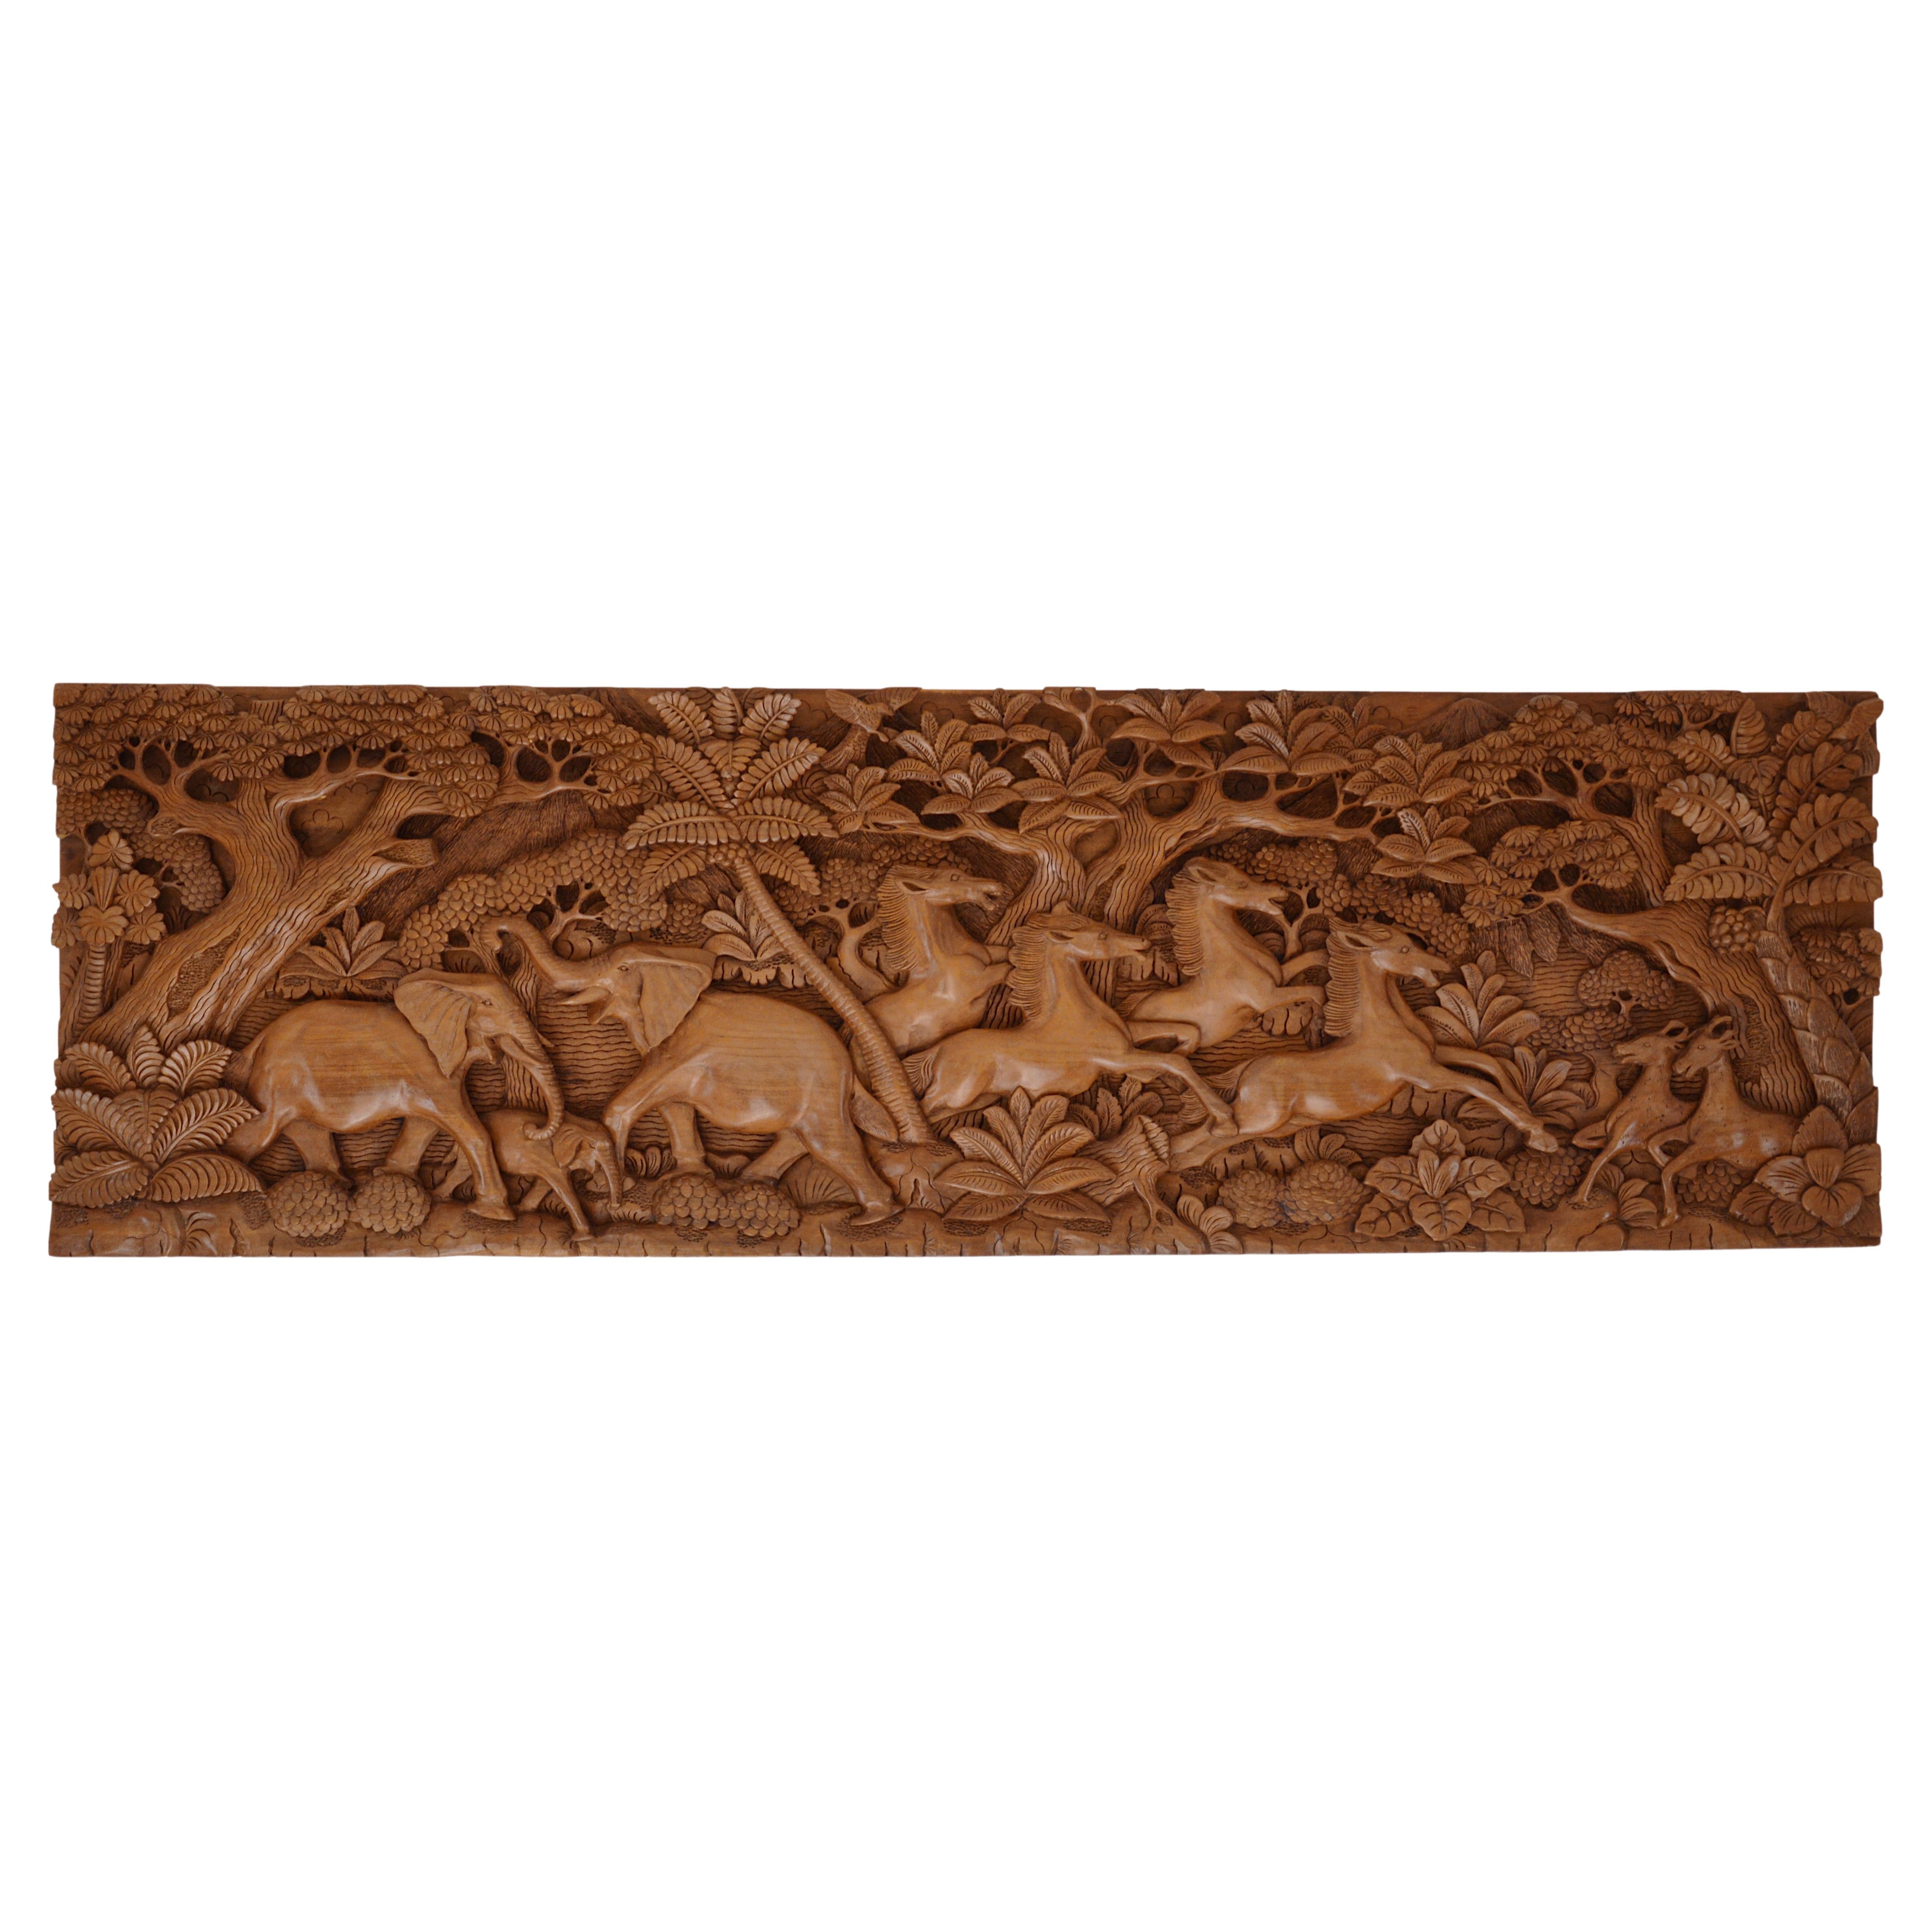 Large Bas-Relief with Exotic Animals and Forest, 1950s-1960s